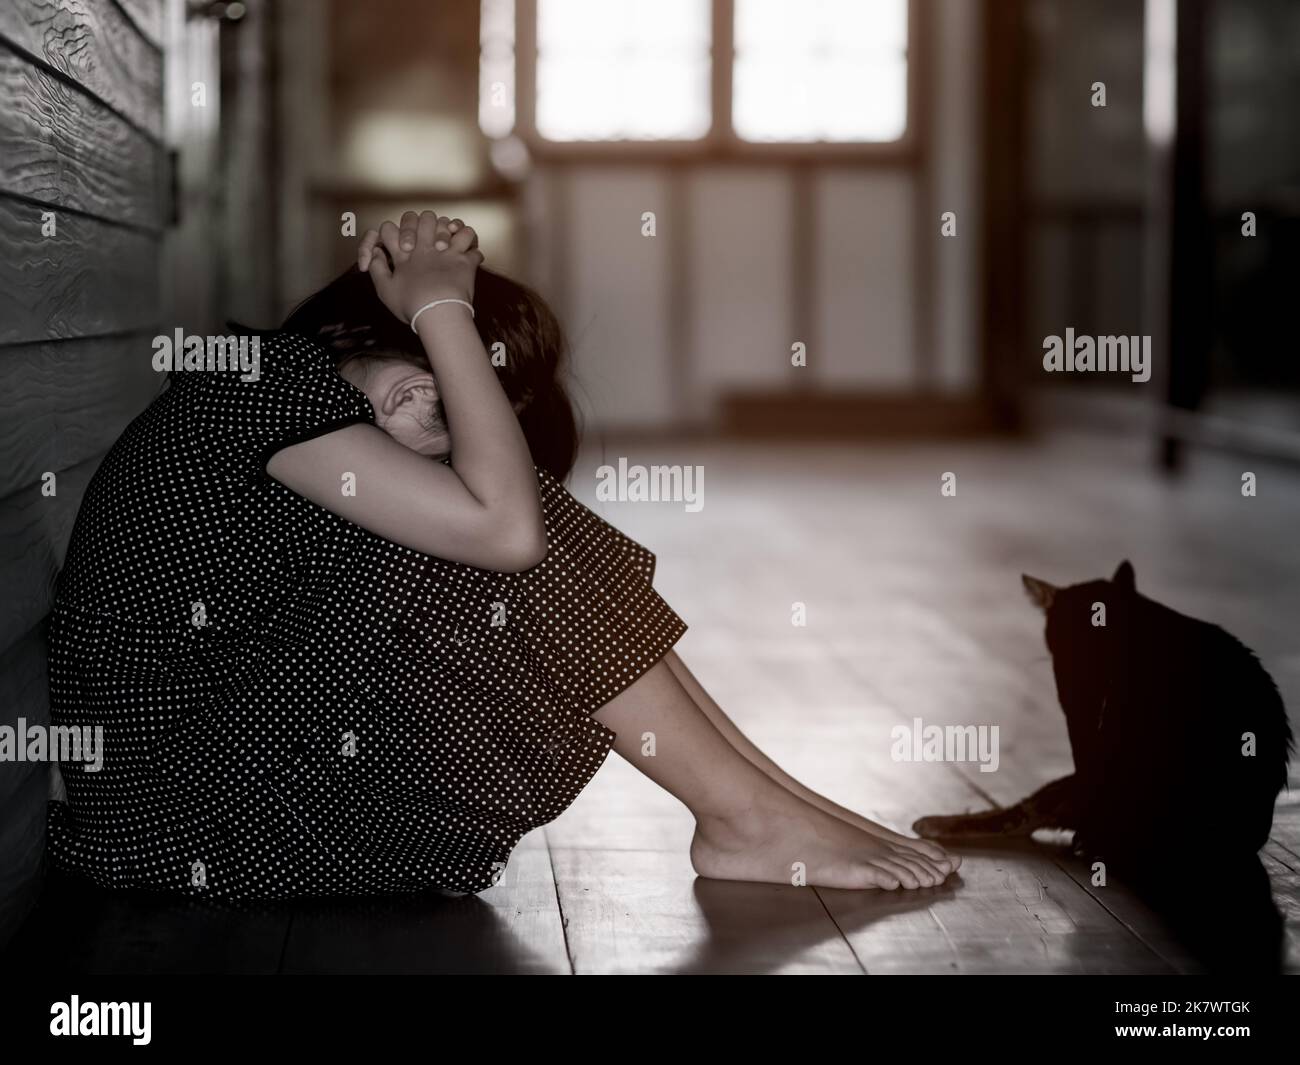 Sad lonely little girl crying while sitting on the floor in dark room with an attitude of sadness.Concept of depression or domestic violence child Stock Photo